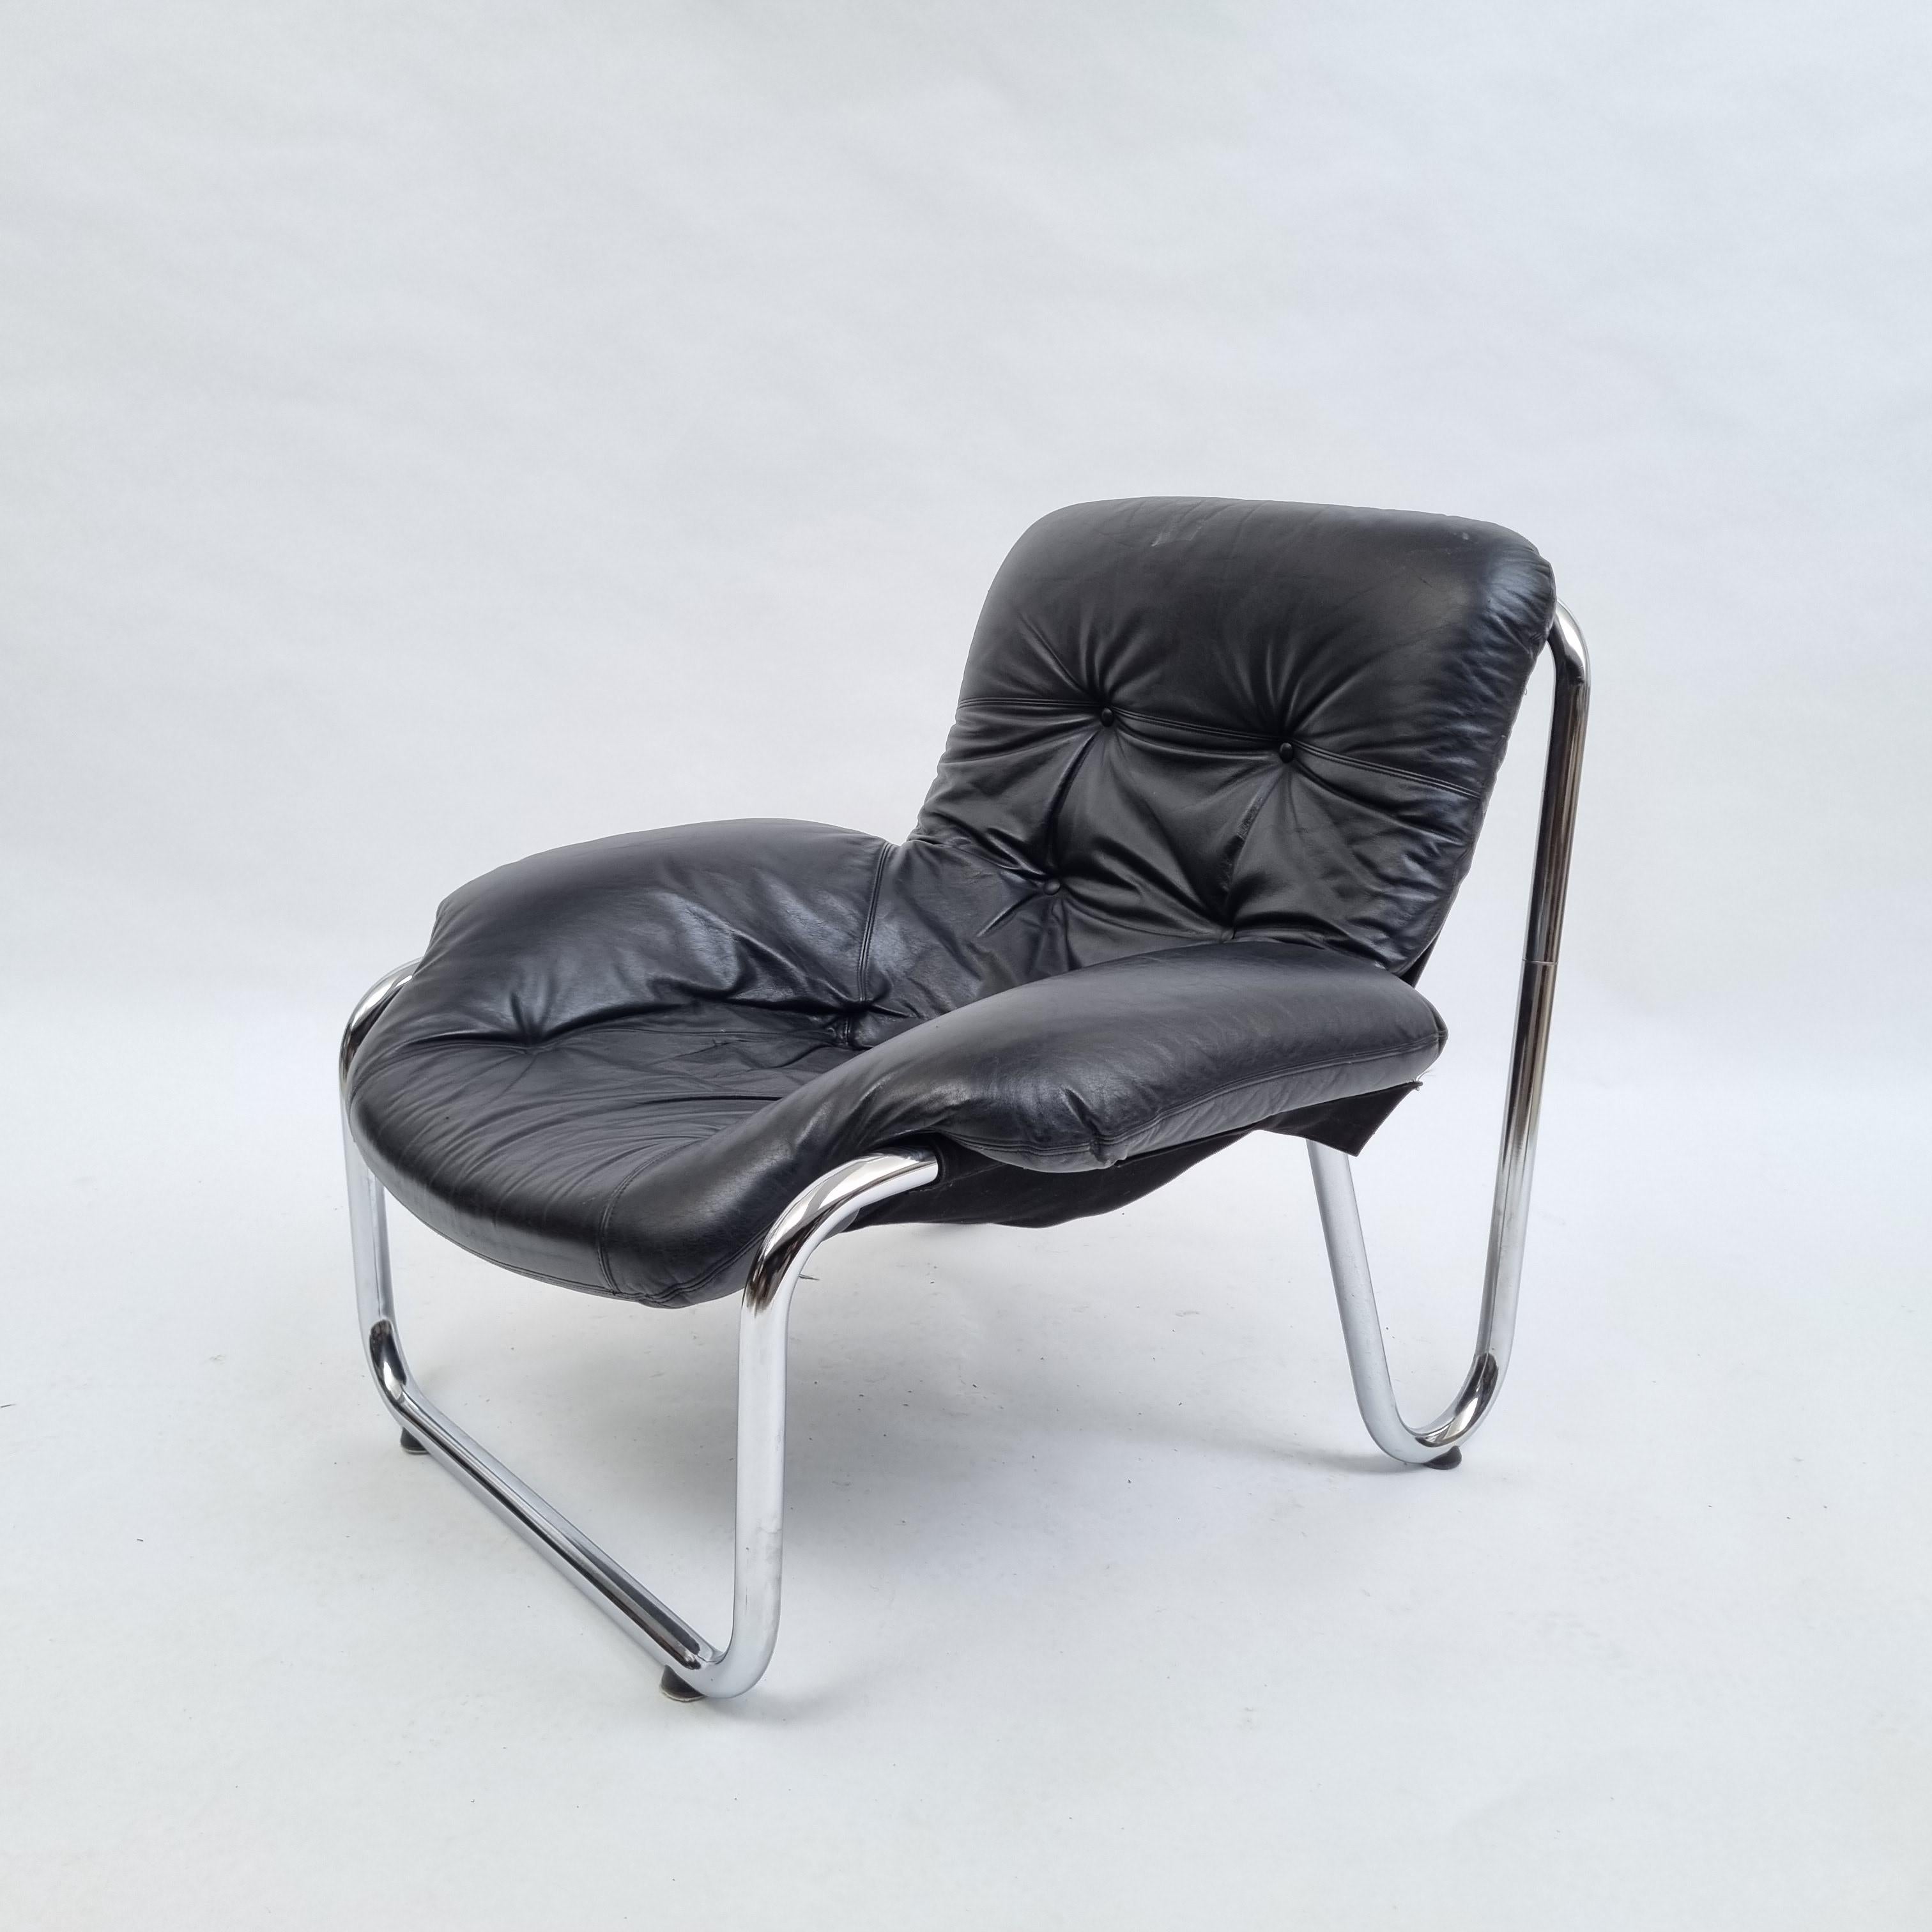 Danish design, lounge chair, leather, original condition. Original black leather in good condition with nice patina. Canvas tied. Armrest of black leather, tubes, chrome steel. Removable pillow. Fits perfectly in a contemporary interior!